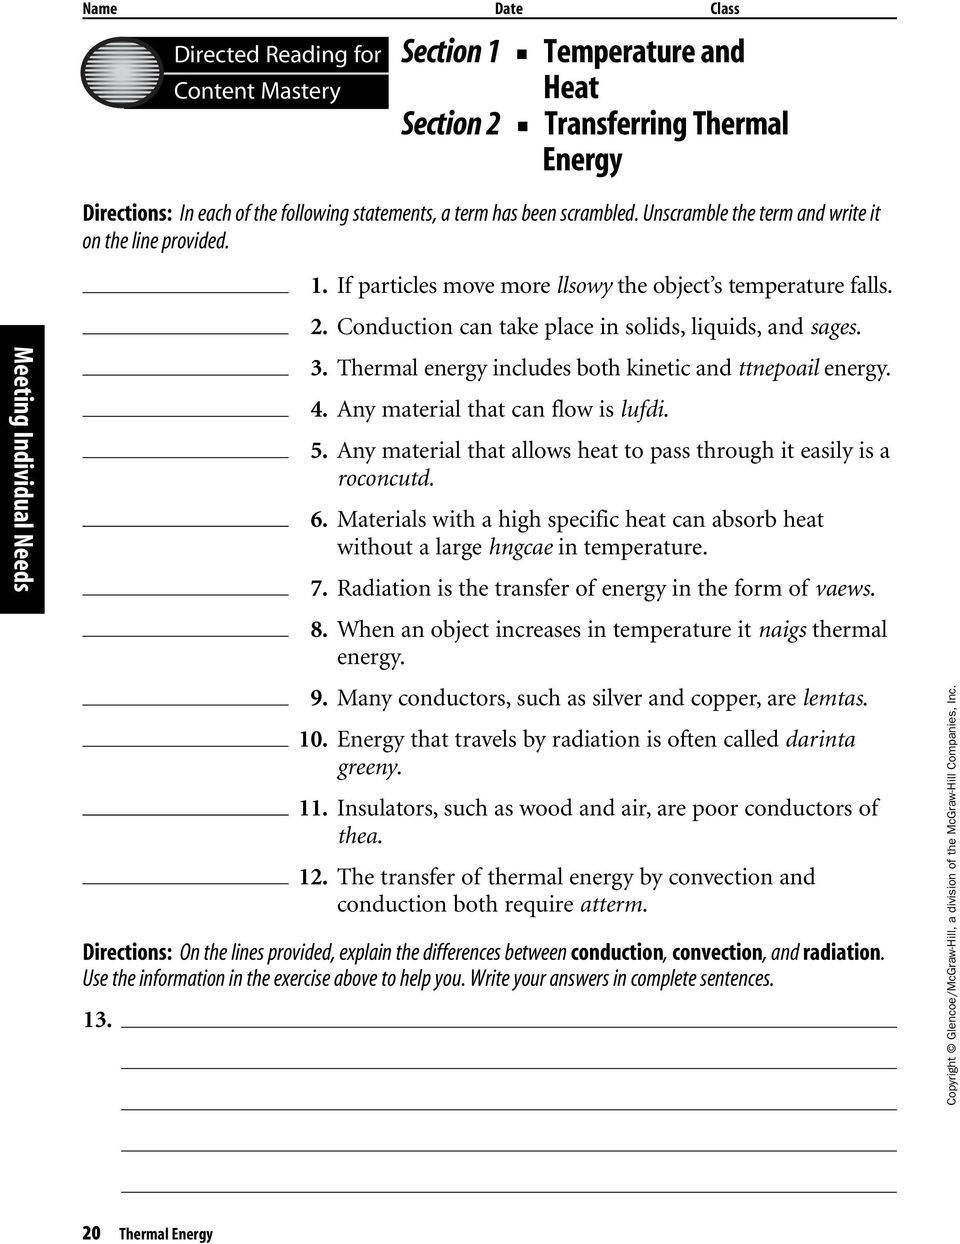 Conduction Convection Radiation Worksheet Energy Worksheet 2 Conduction Convection and Radiation